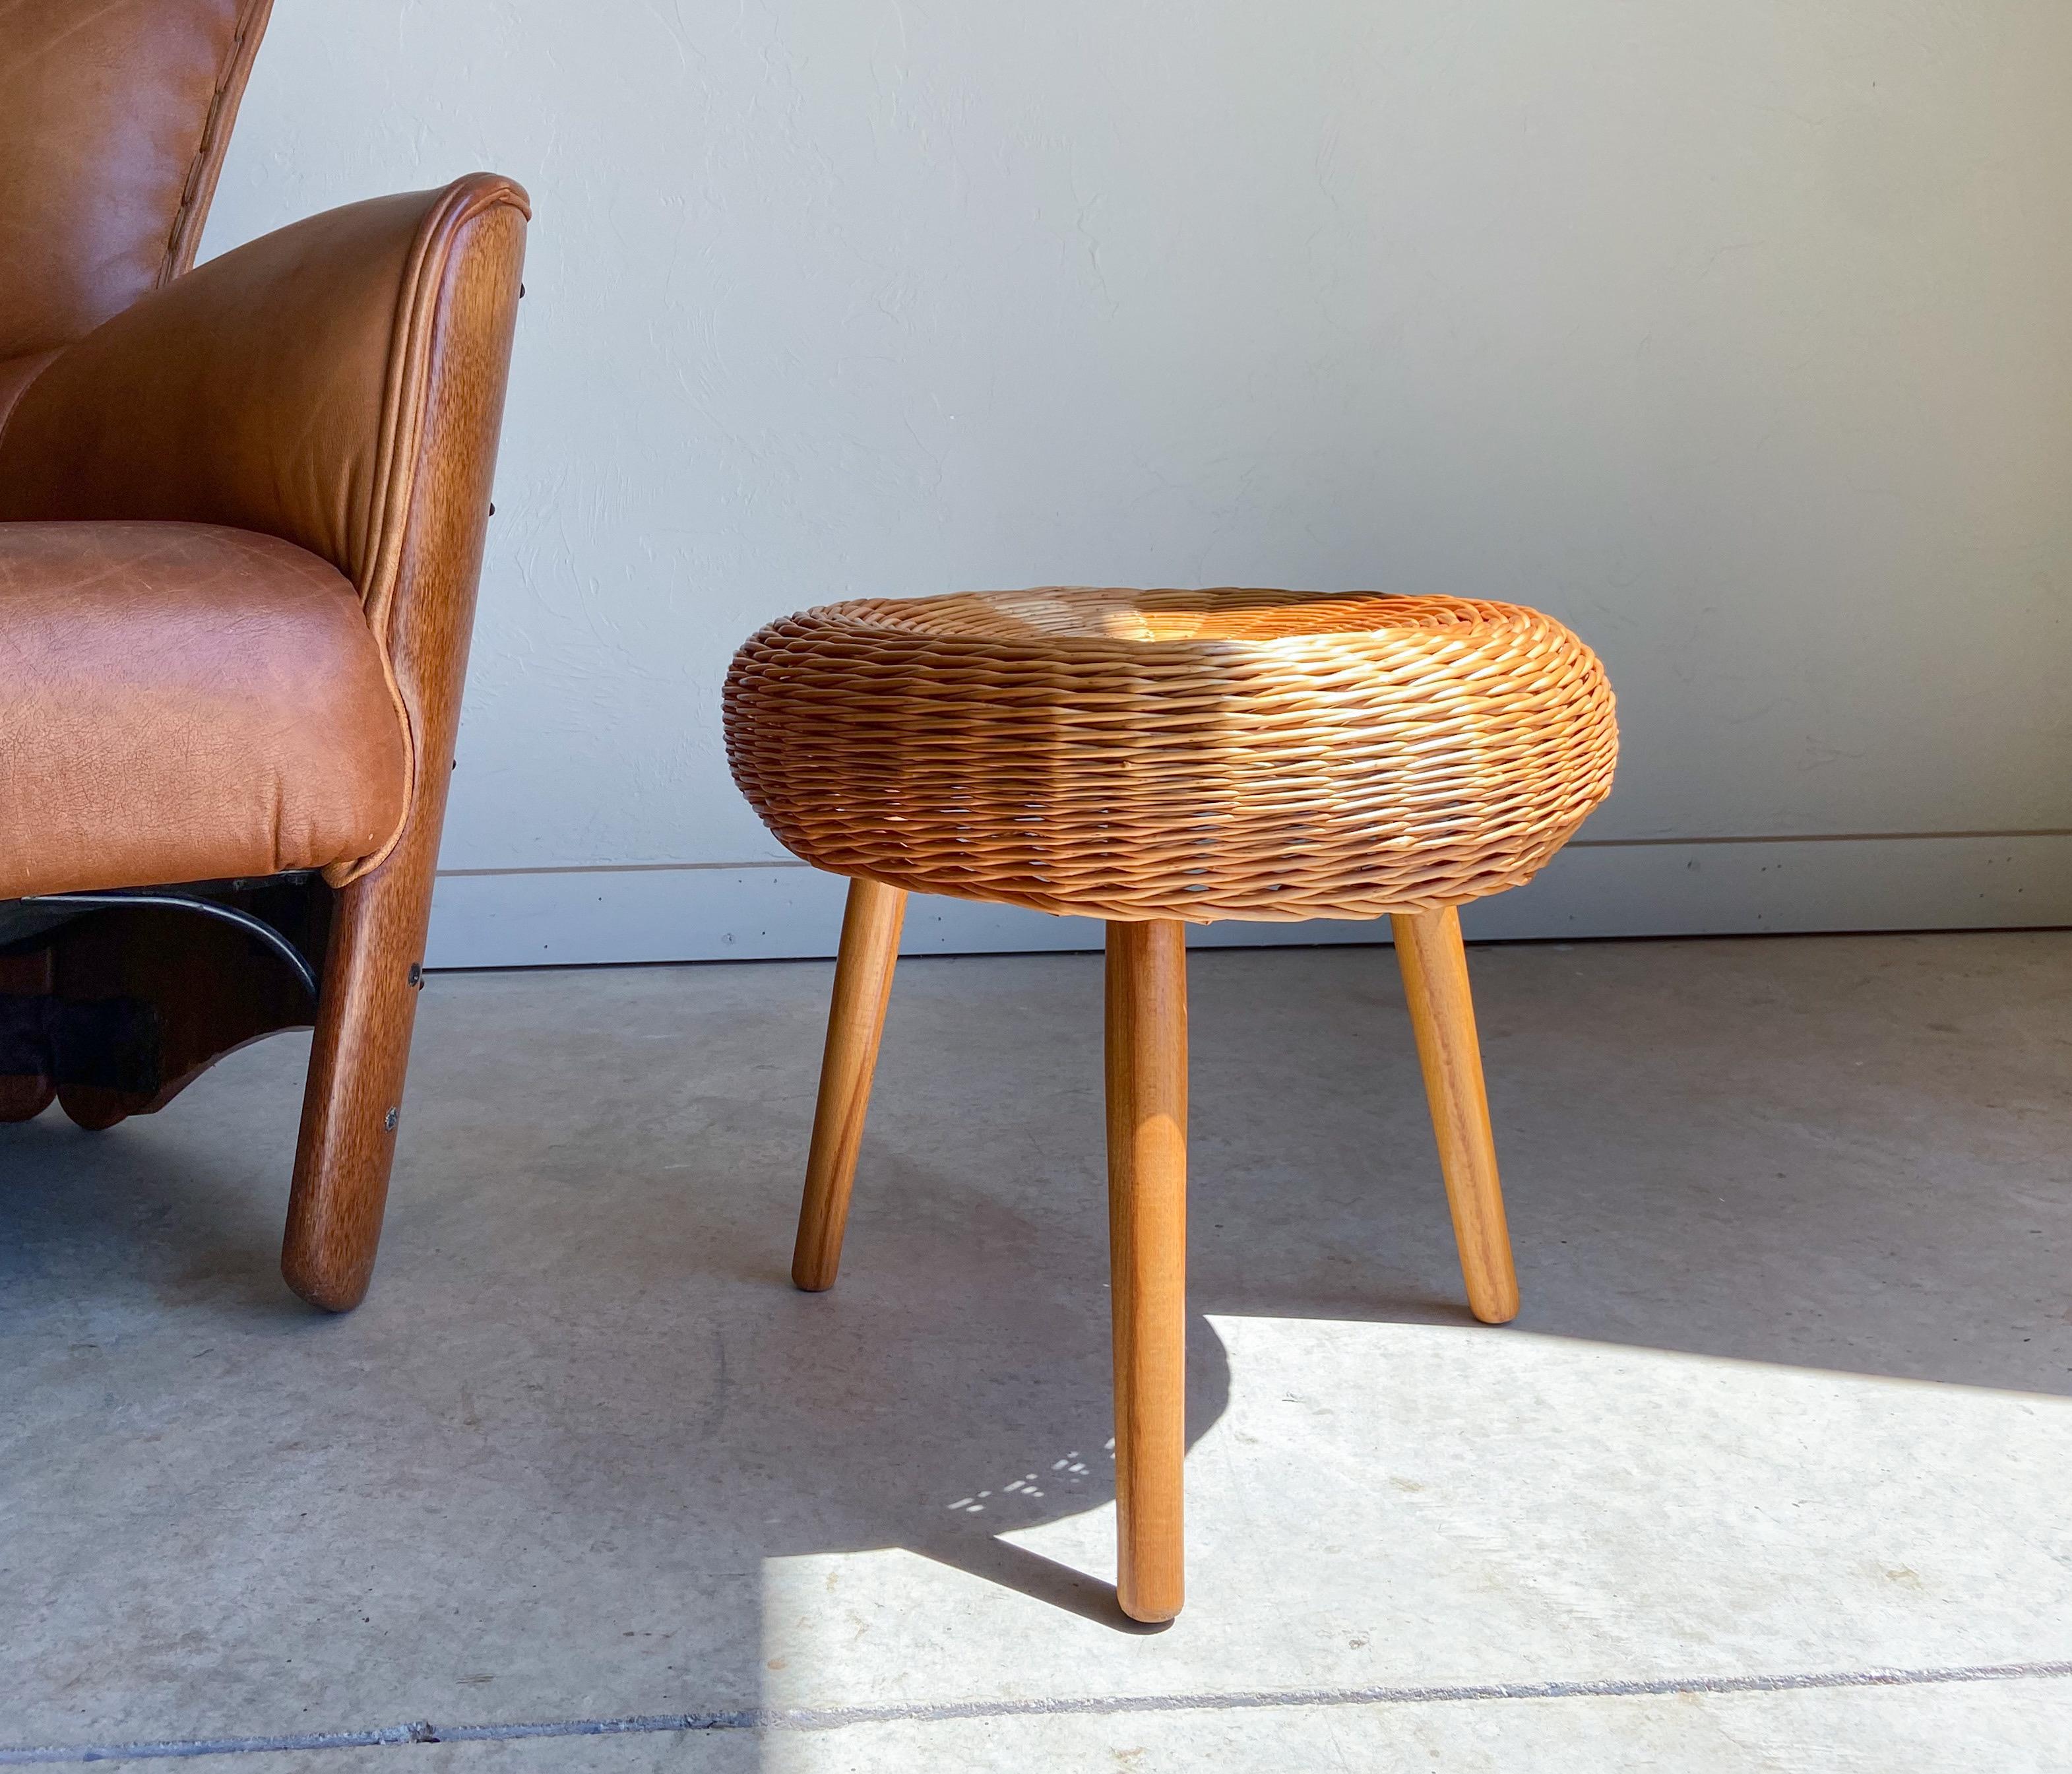 A vintage rattan/wicker and wood stool attributed to Tony Paul.

Featuring a hand woven rattan seat that sits upon a wood frame and solid birch legs.

This would make a perfect accent piece that is suitable in a variety of settings including